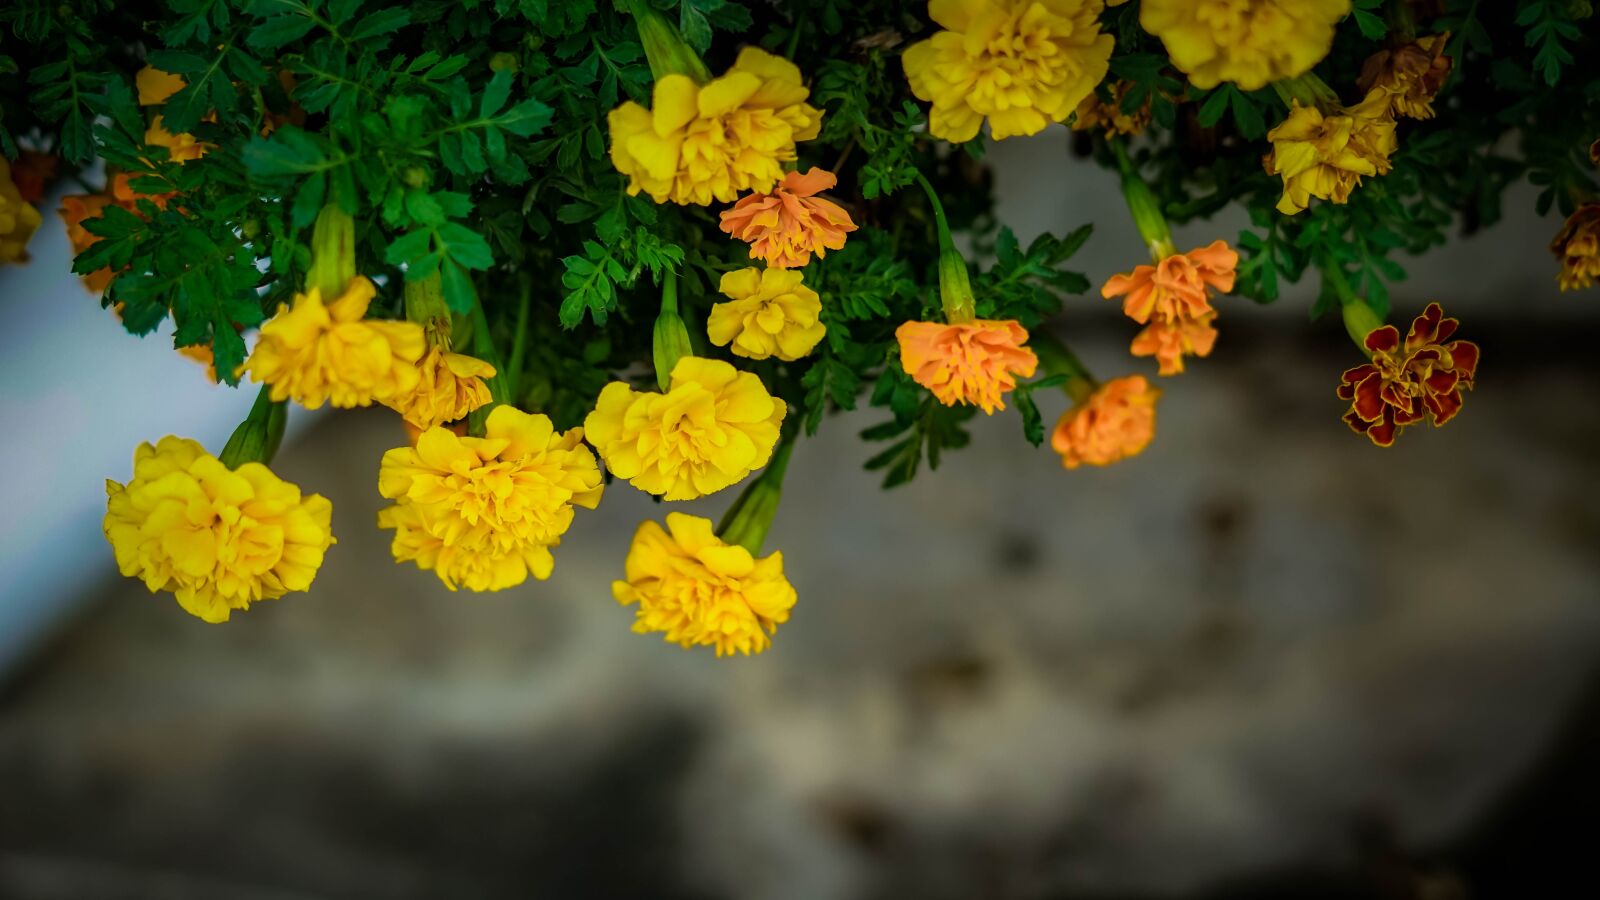 Sony a6000 sample photo. Flower, yellow, nature photography